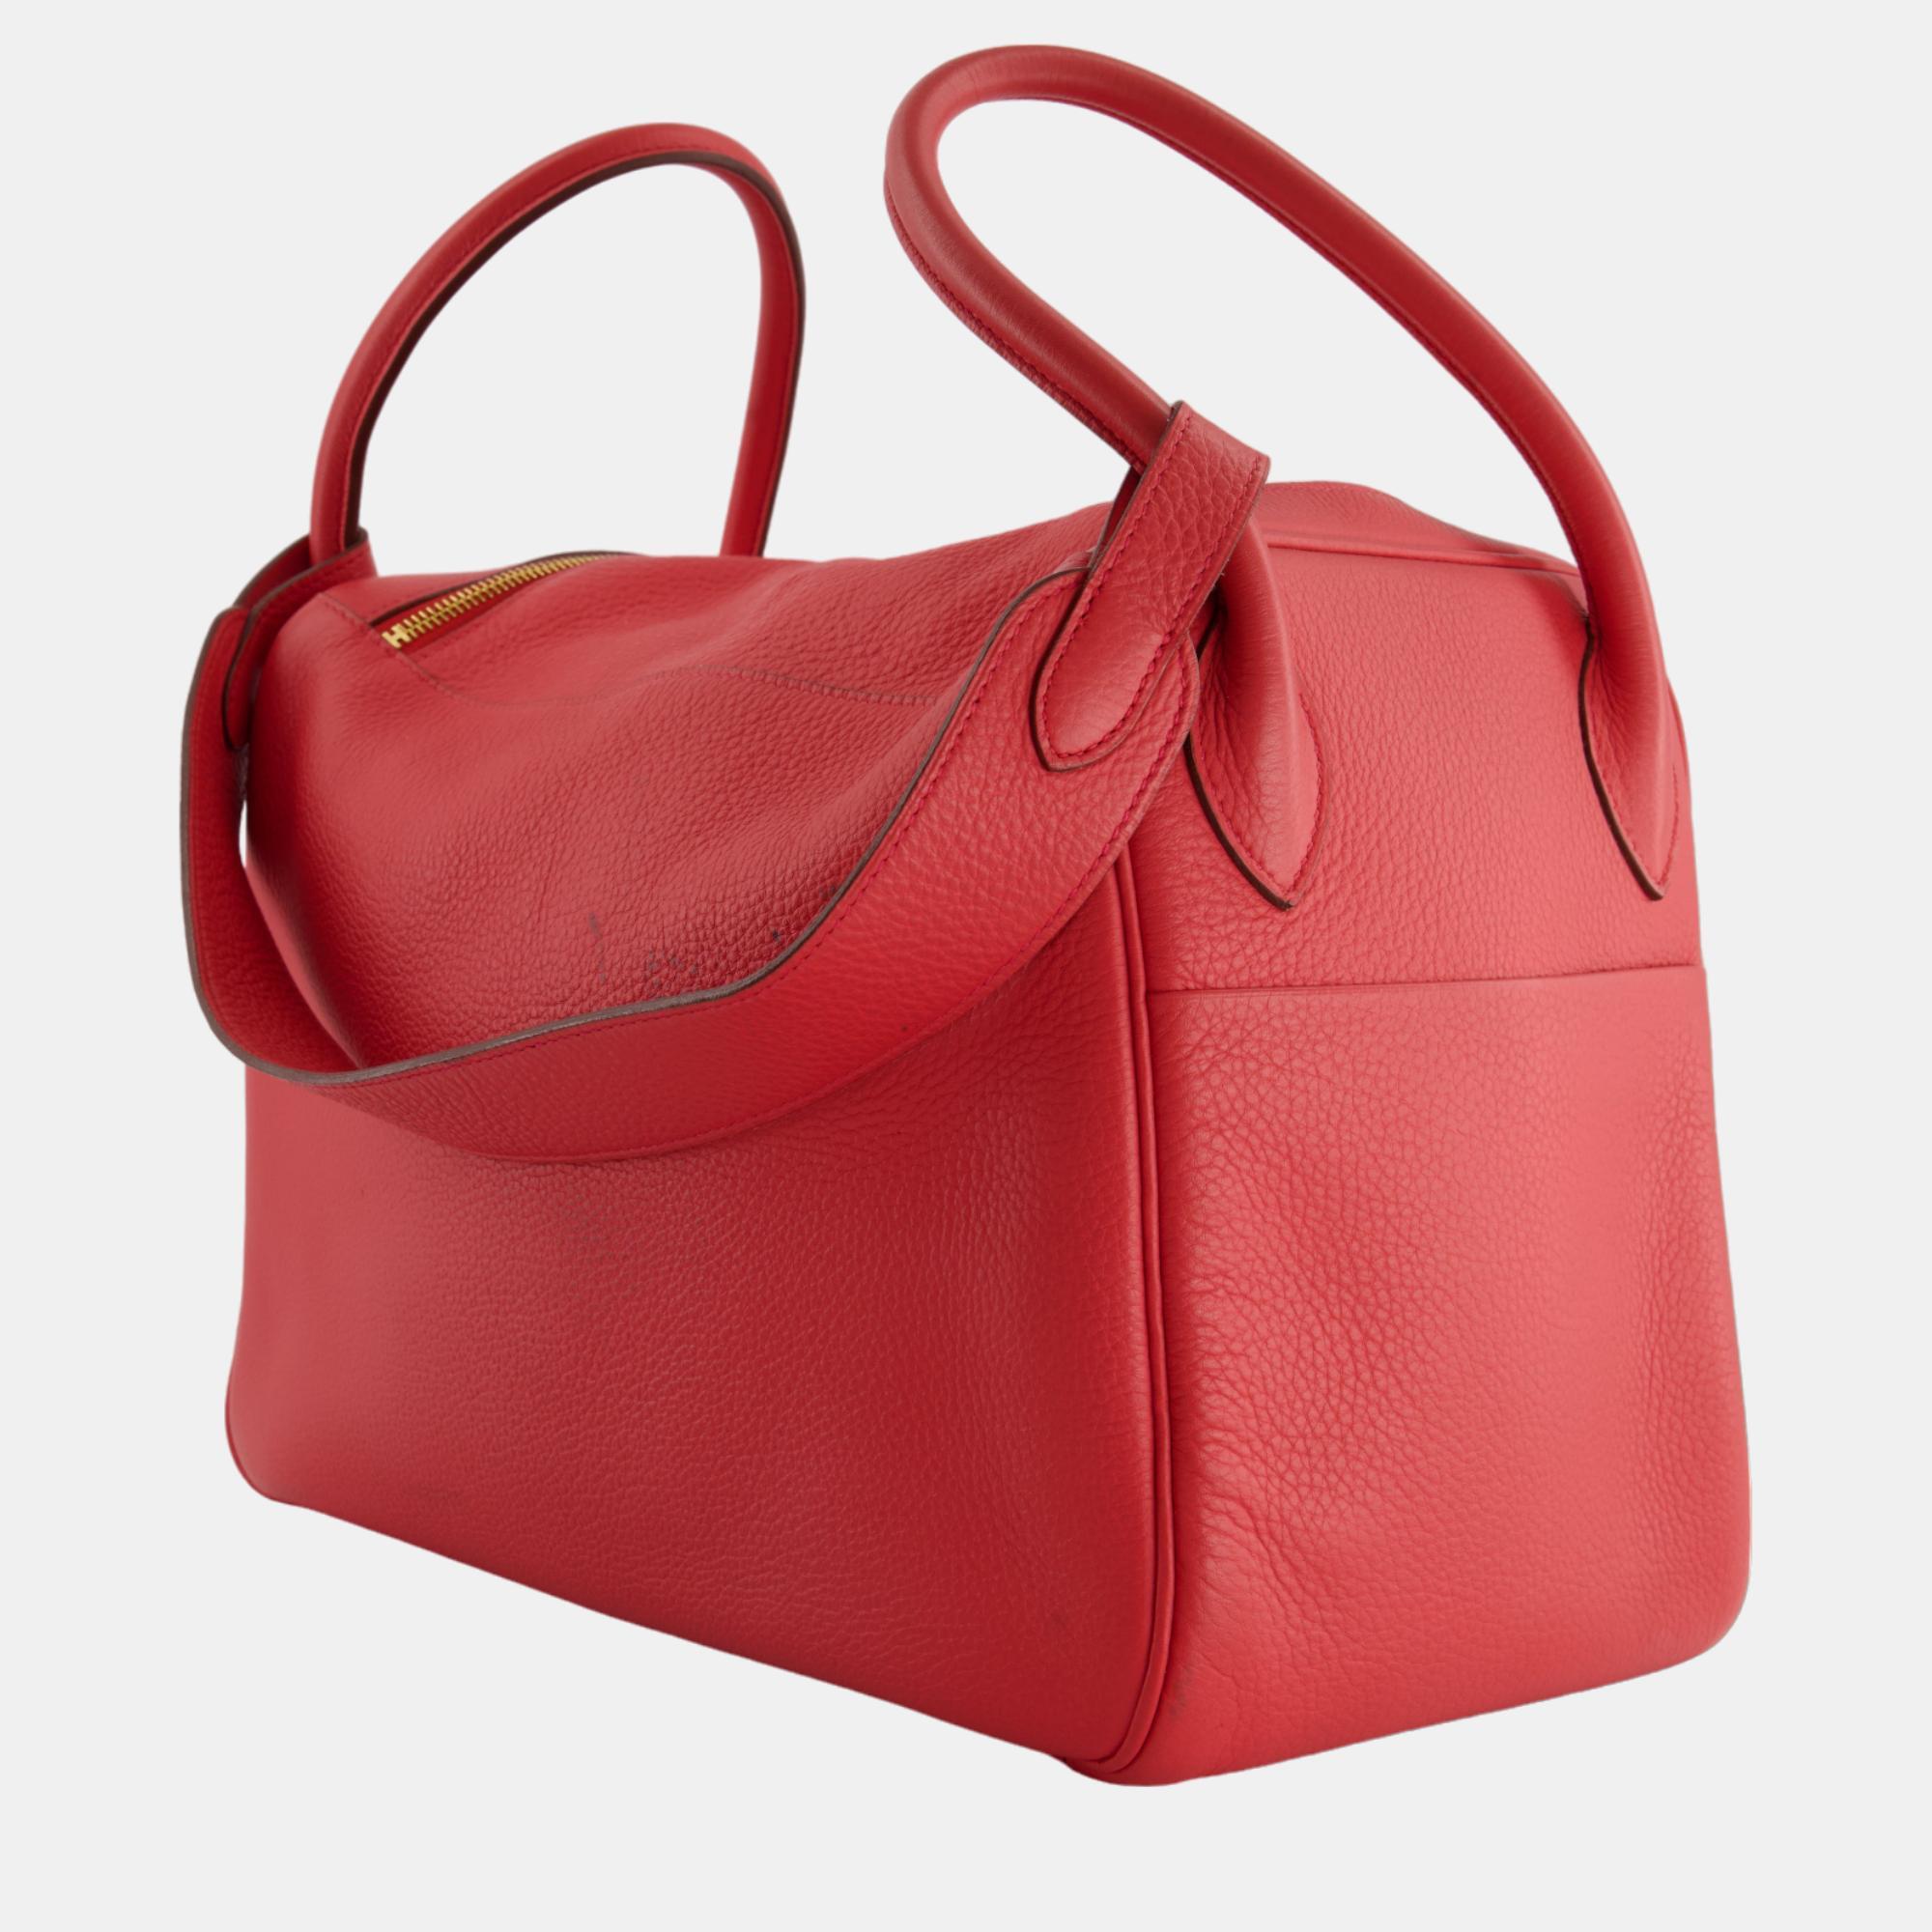 Hermes Lindy 34 Bag In Rose Jaipur Clemence Leather With Gold Hardware